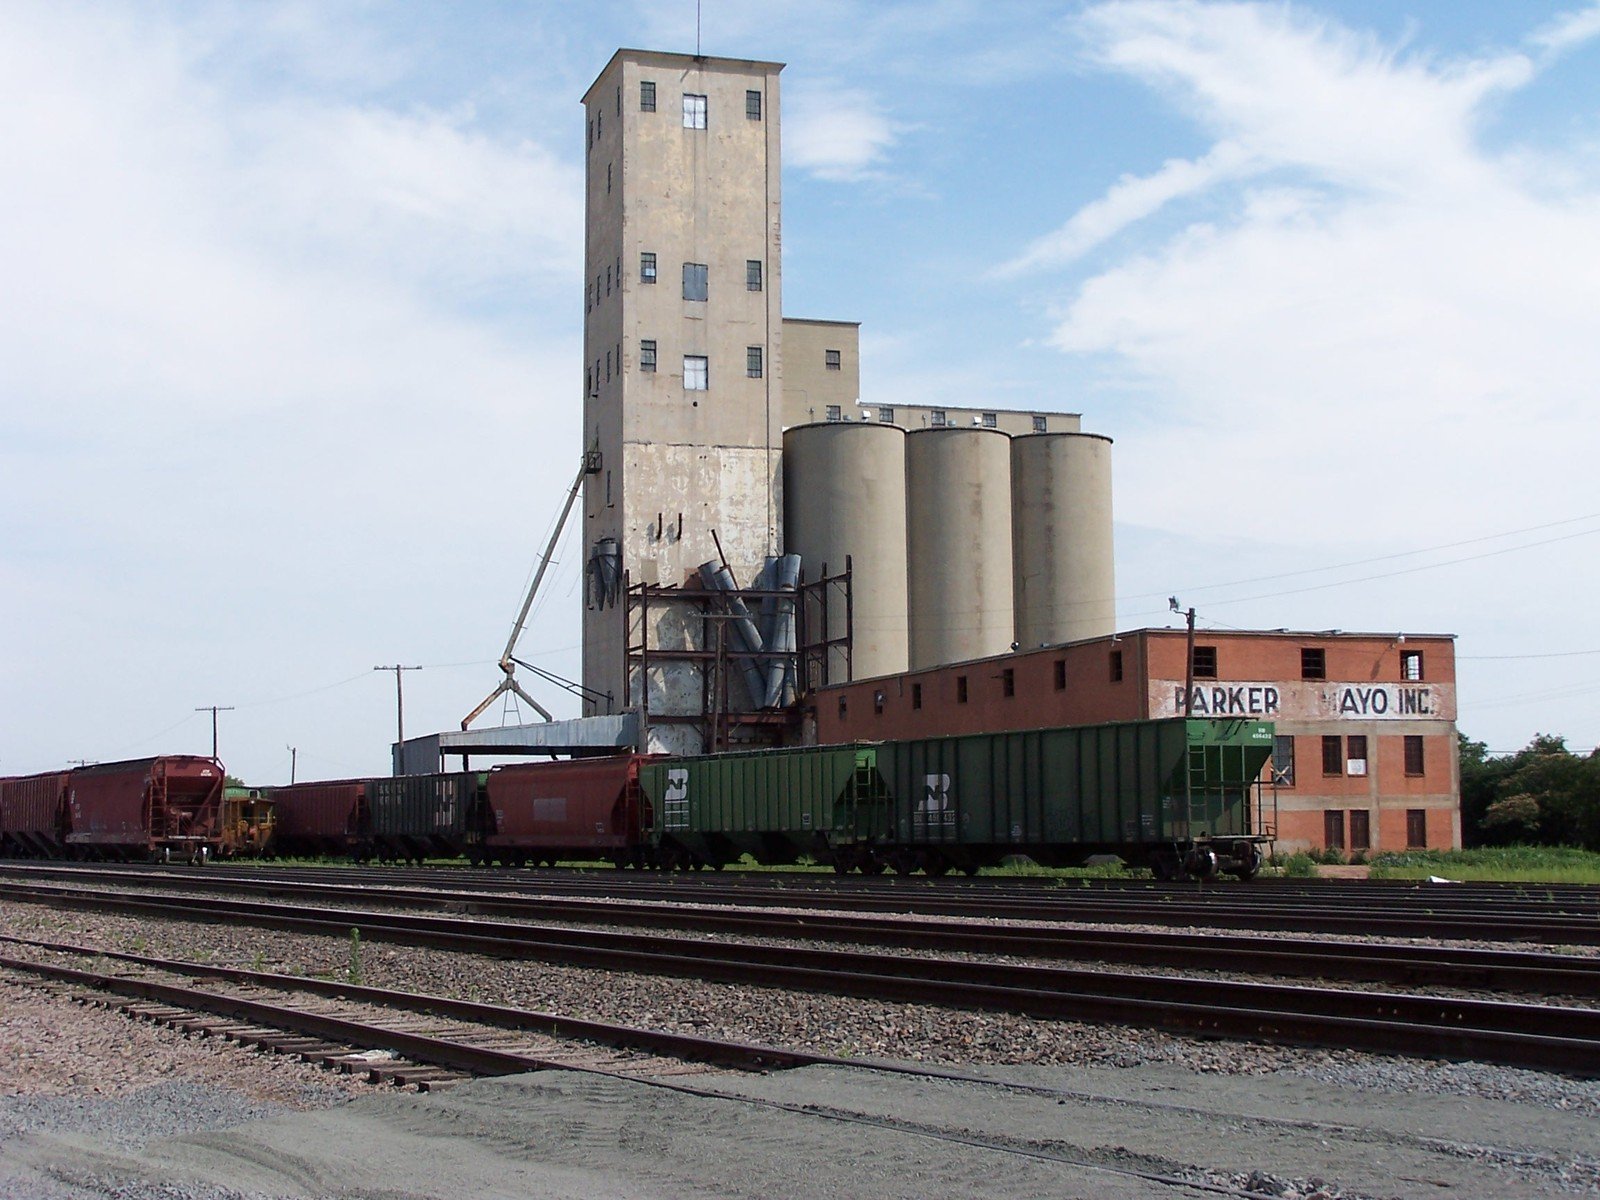 two industrial buildings, one on the right and one on the left, are behind railroad tracks